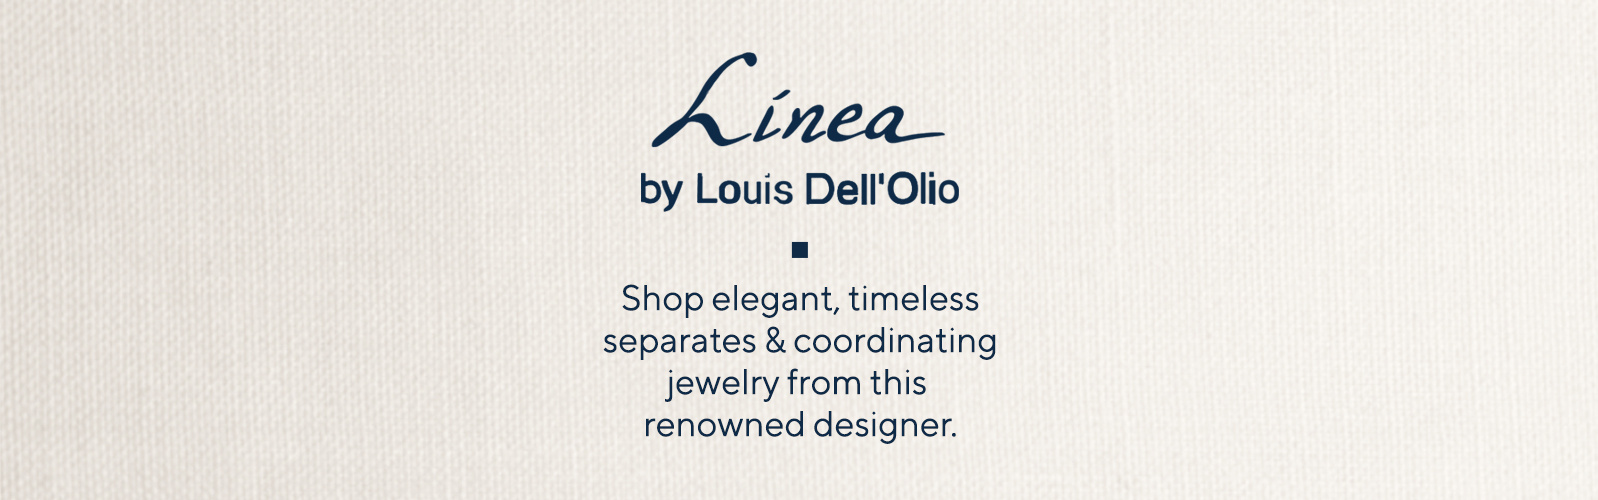 Linea by Louis Dell'Olio Shop elegant, timeless separates & coordinating jewelry from this renowned designer